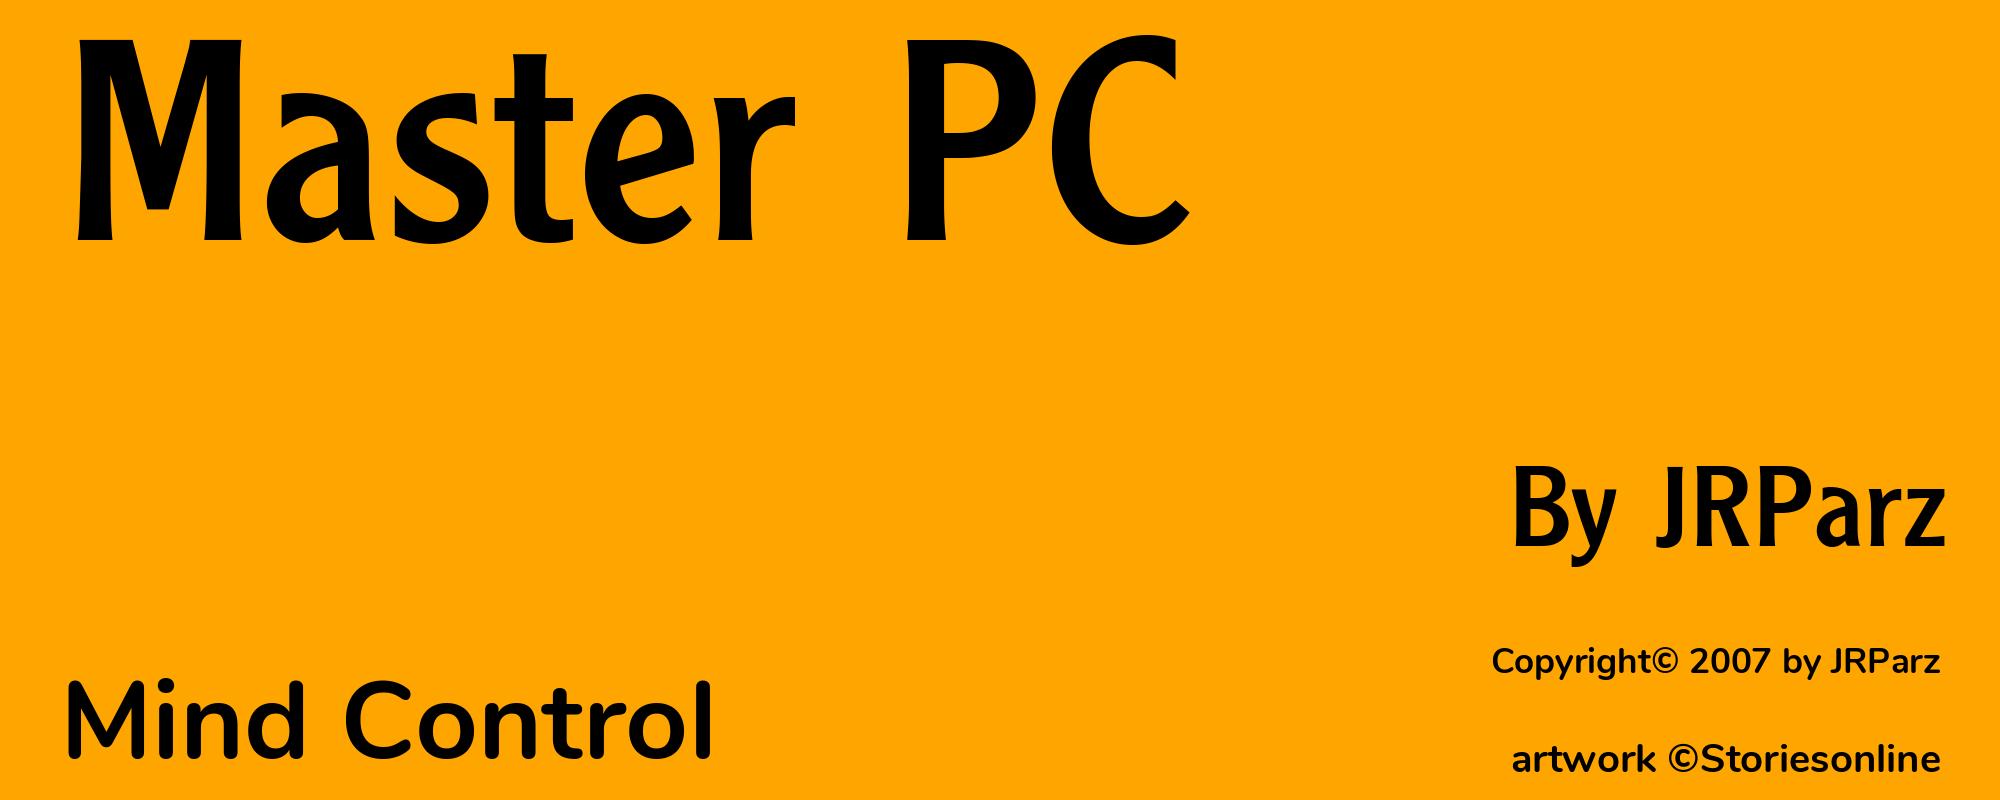 Master PC - Cover